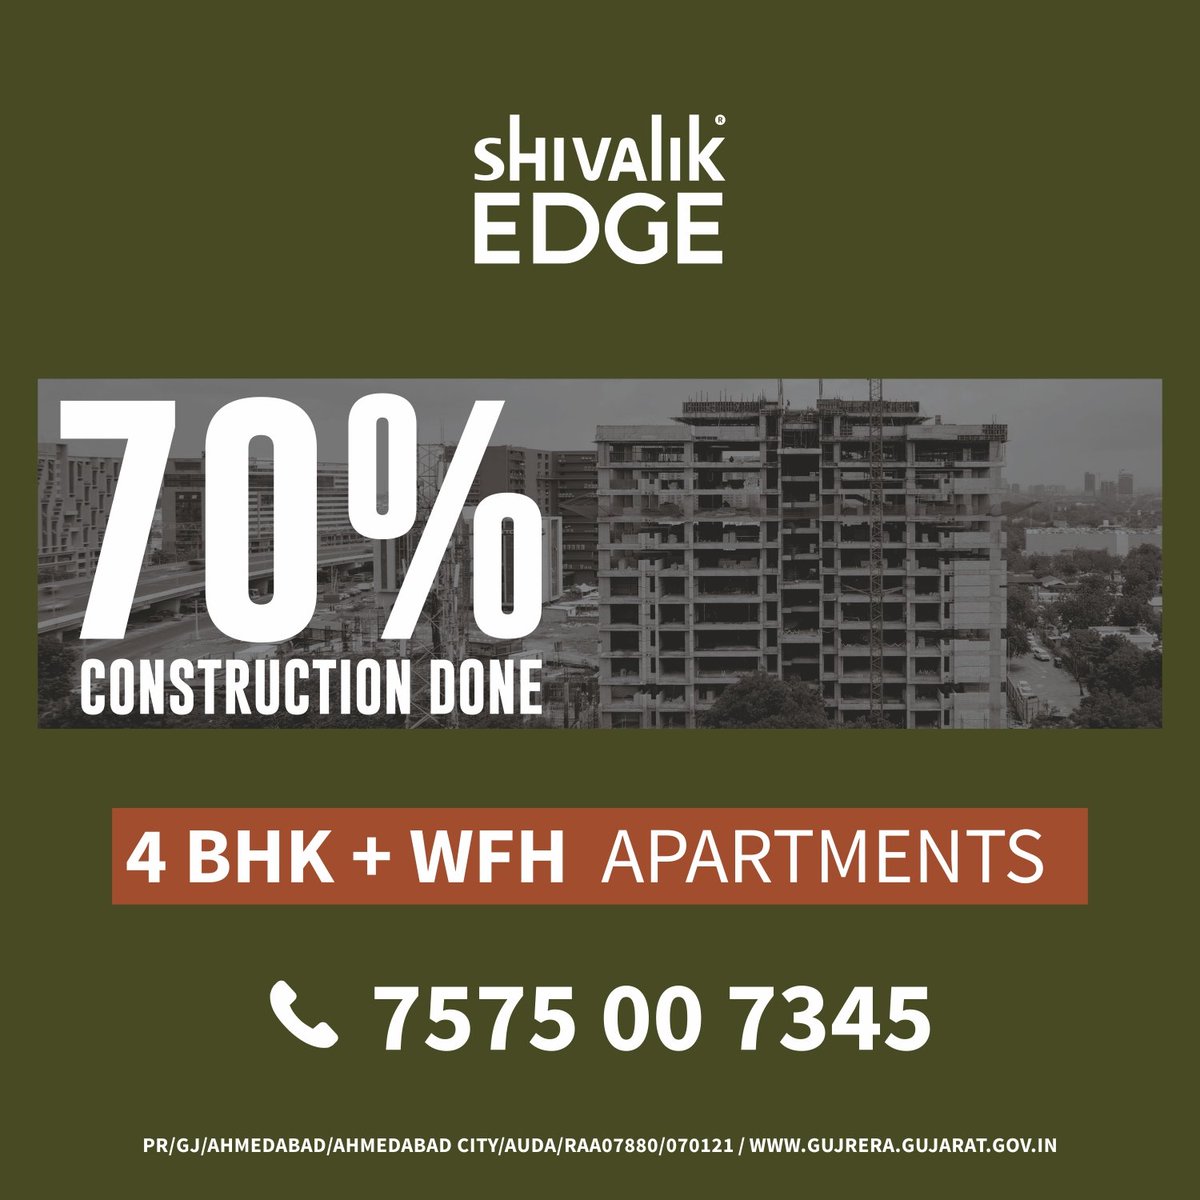 70% construction done! Discover the ultimate luxury, only at Shivalik Edge.

Call +91 7575 00 7343 or visit shivalikgroup.com

#shivalikgroup #realestate #residentialliving #realestateahmedabad